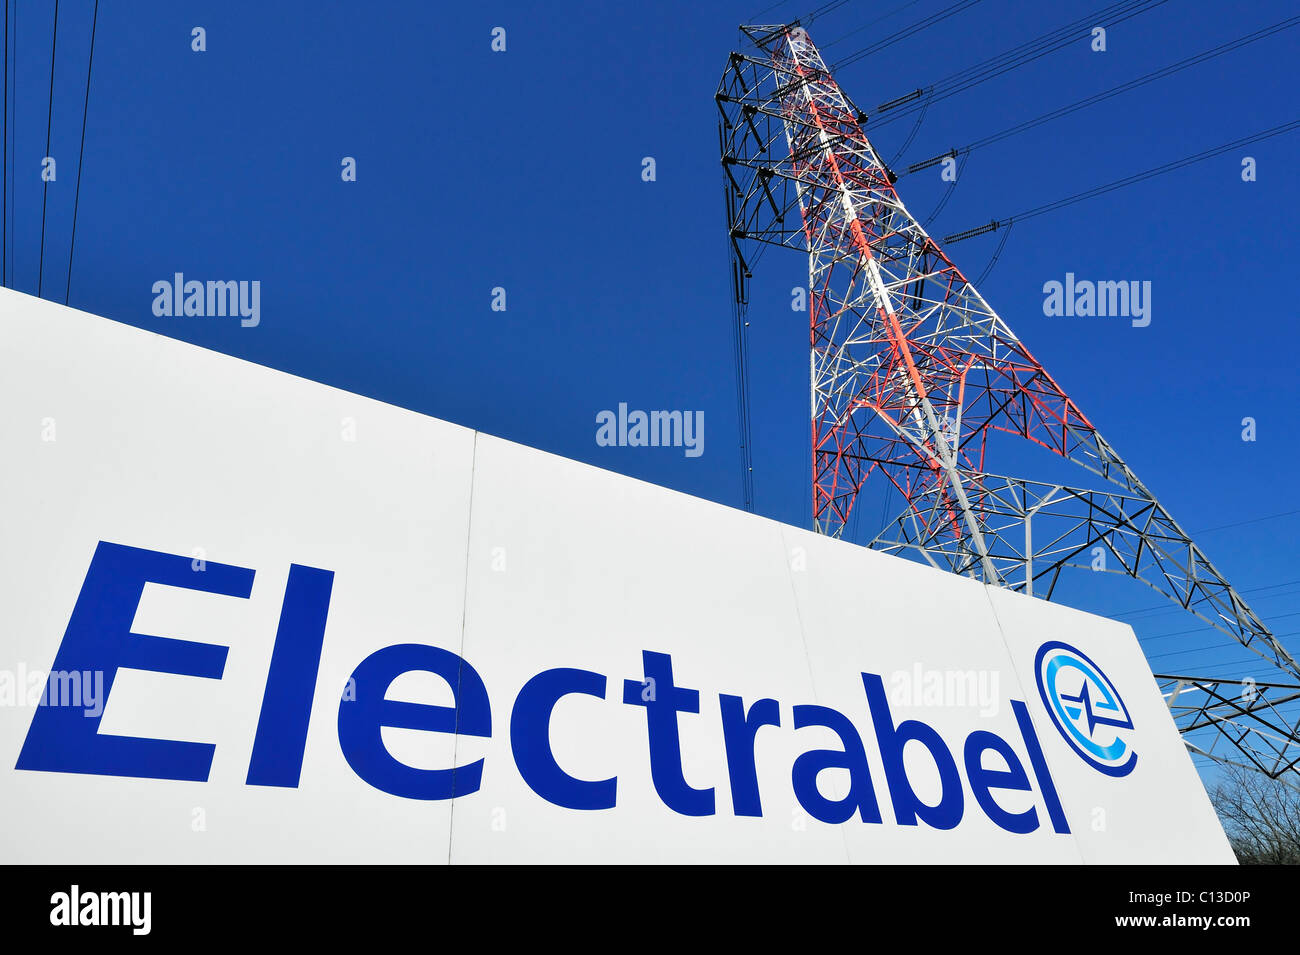 Electricity high-tension pylon and sign with logo of energy corporation Electrabel, Ghent, Belgium Stock Photo